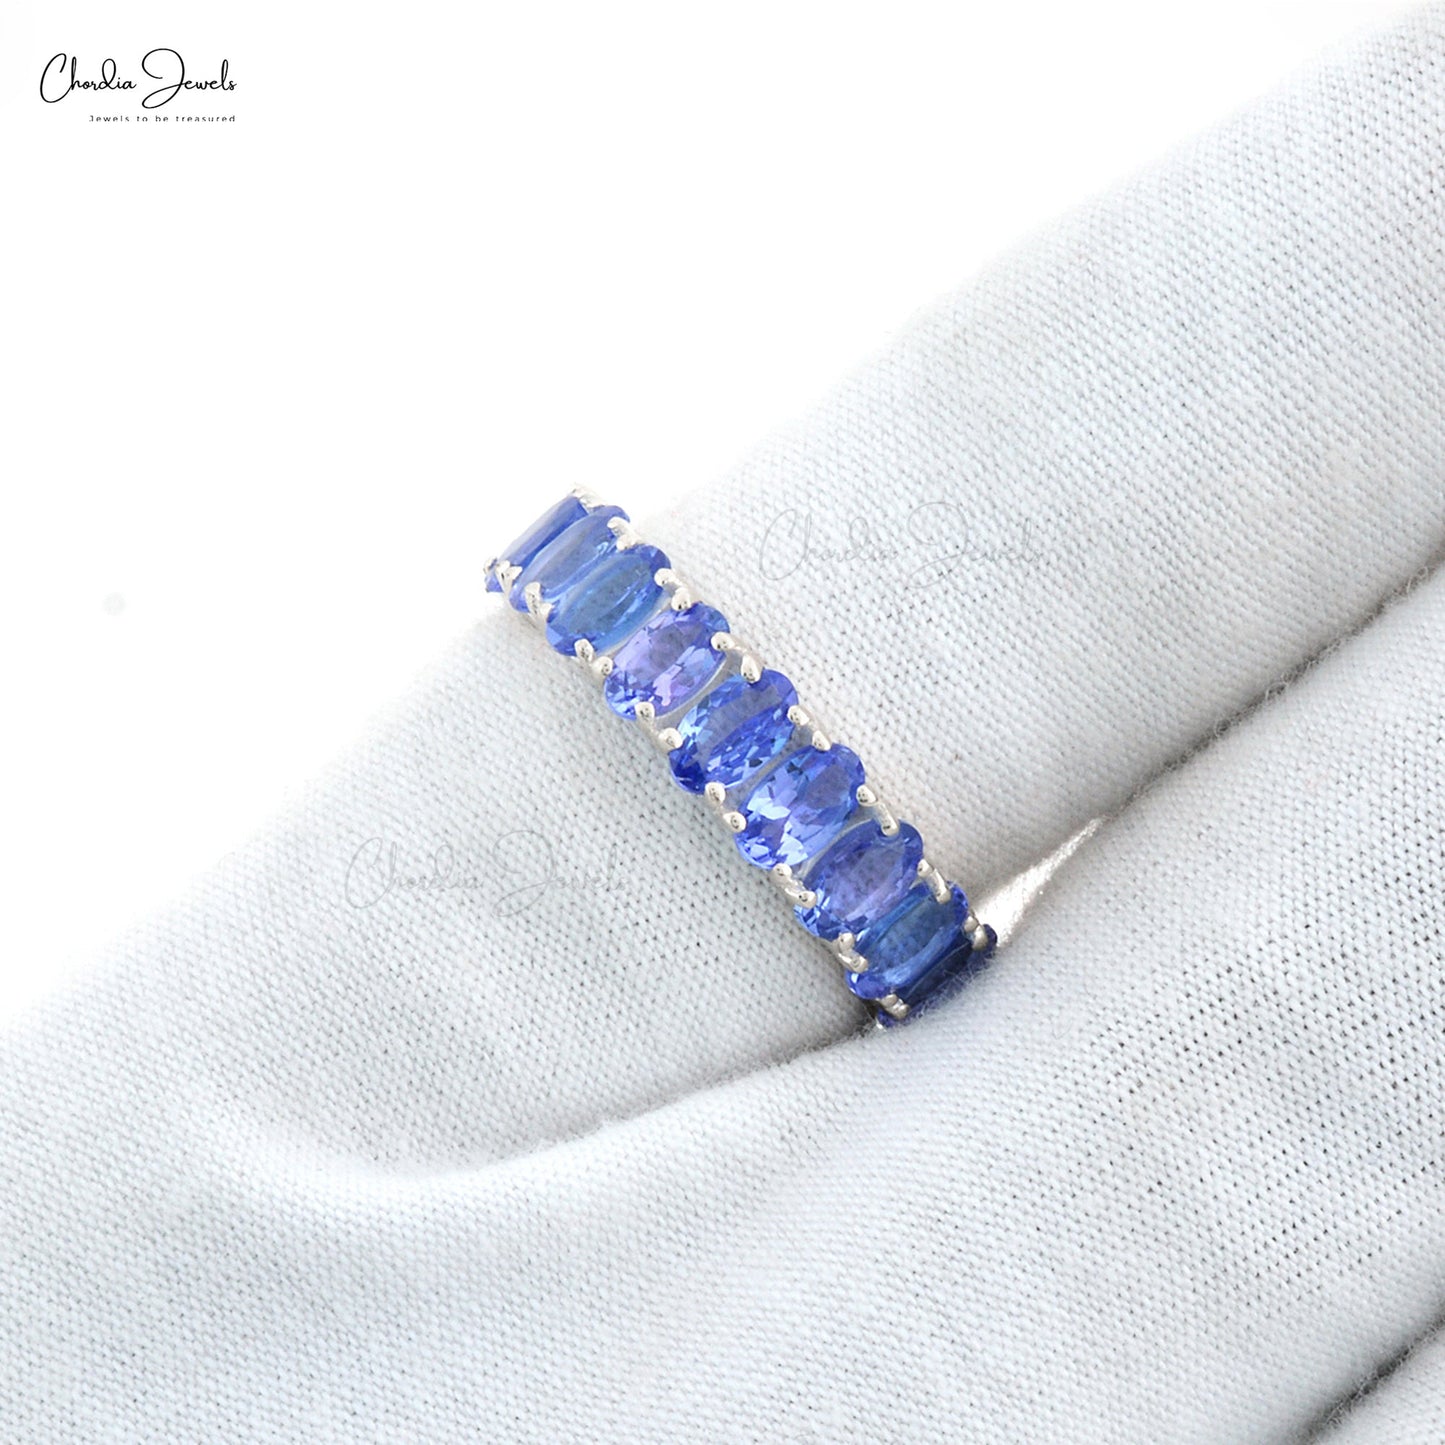 Eternity Ring In 14k Real White Gold Natural Tanzanite Gemstone Handcrafted Ring For Her